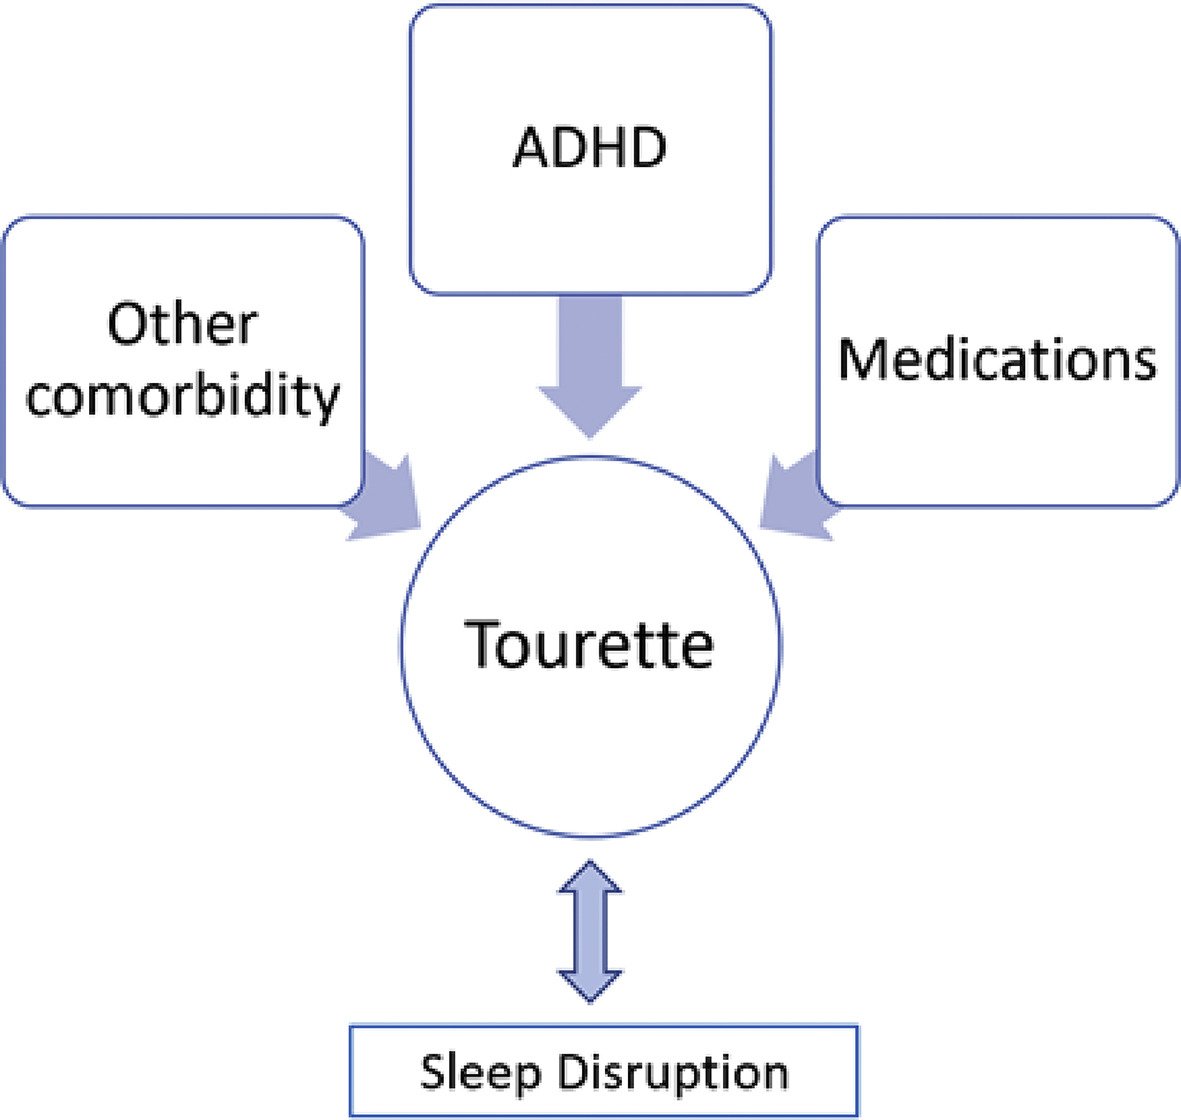 Tourette Disorder and Sleep

Article discusses evidence that #sleep is affected negatively in patients & particularly children with #TouretteDisorder, & treatment.

sciencedirect.com/science/articl… #openaccess